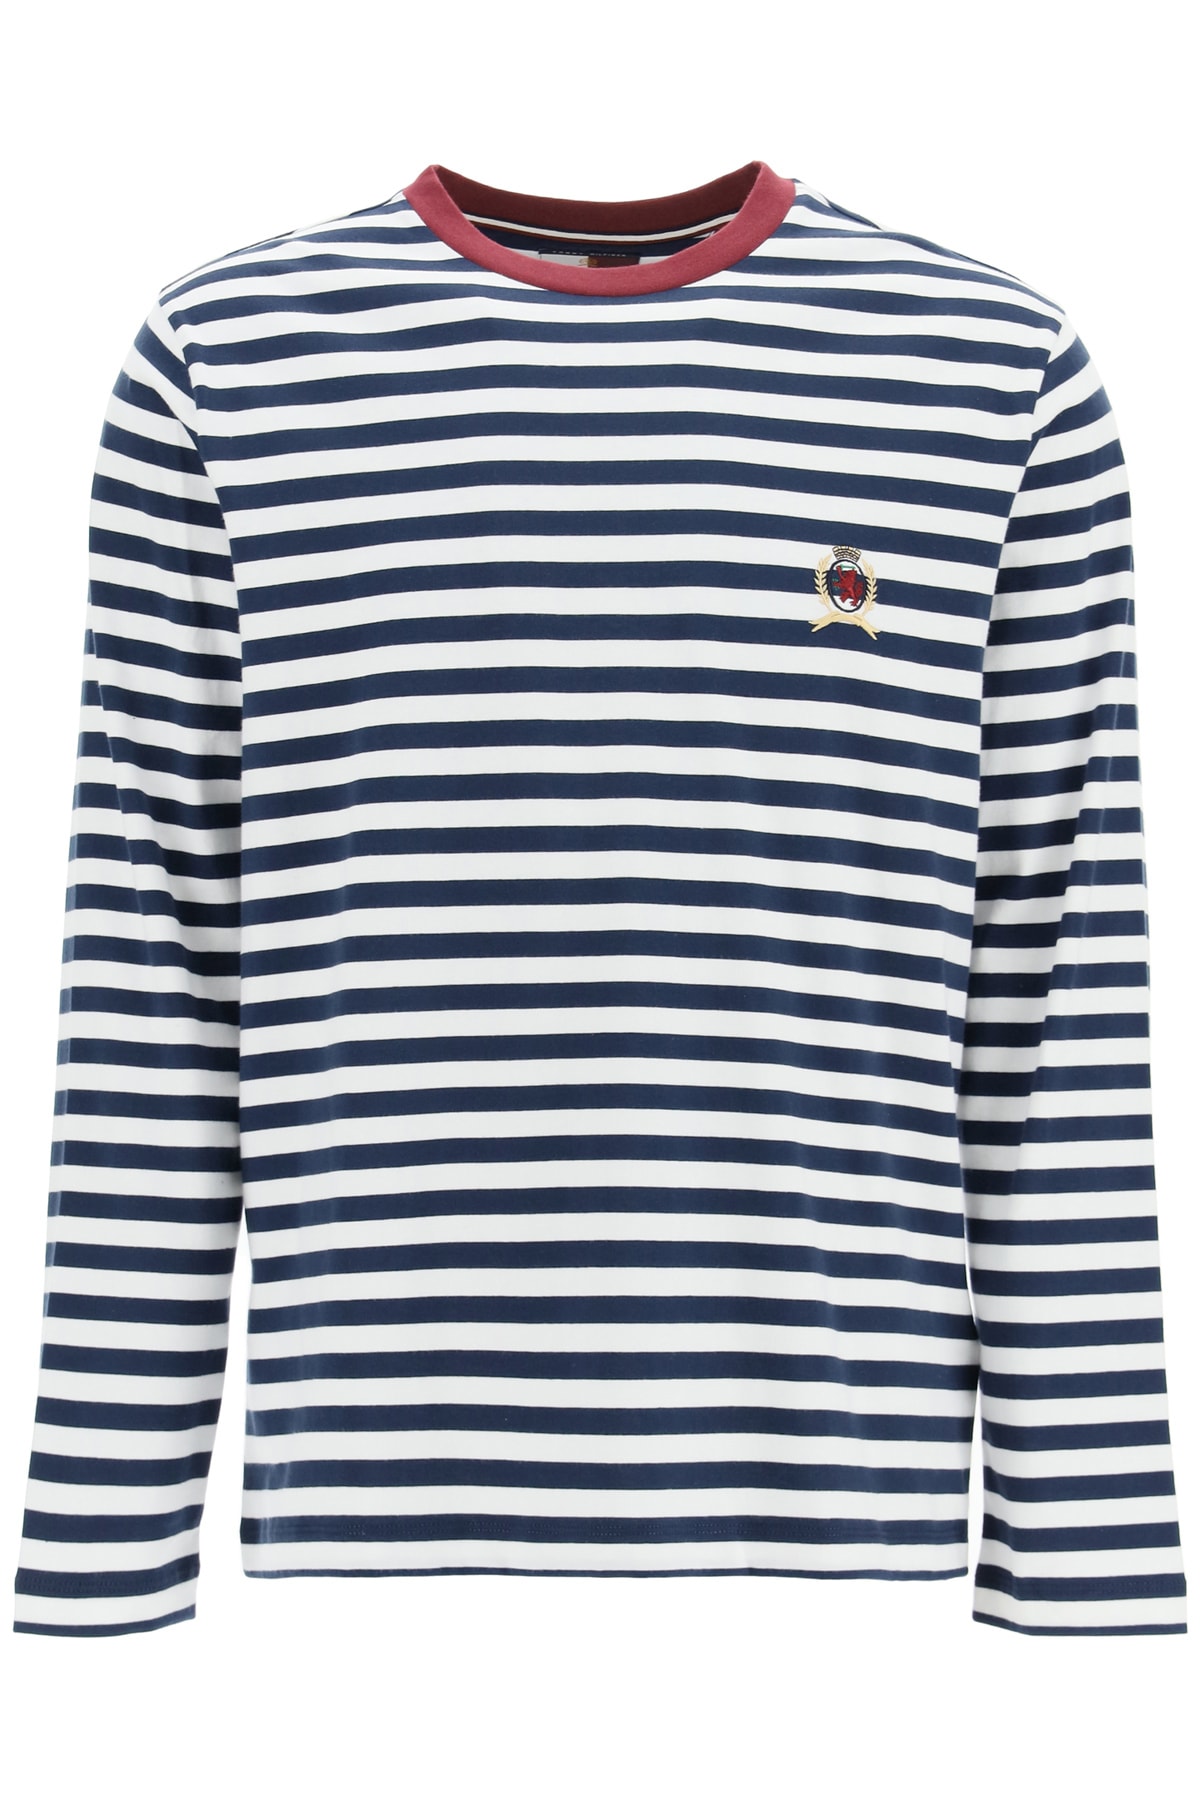 Tommy Hilfiger Striped T-shirt With Embroidered Emblem